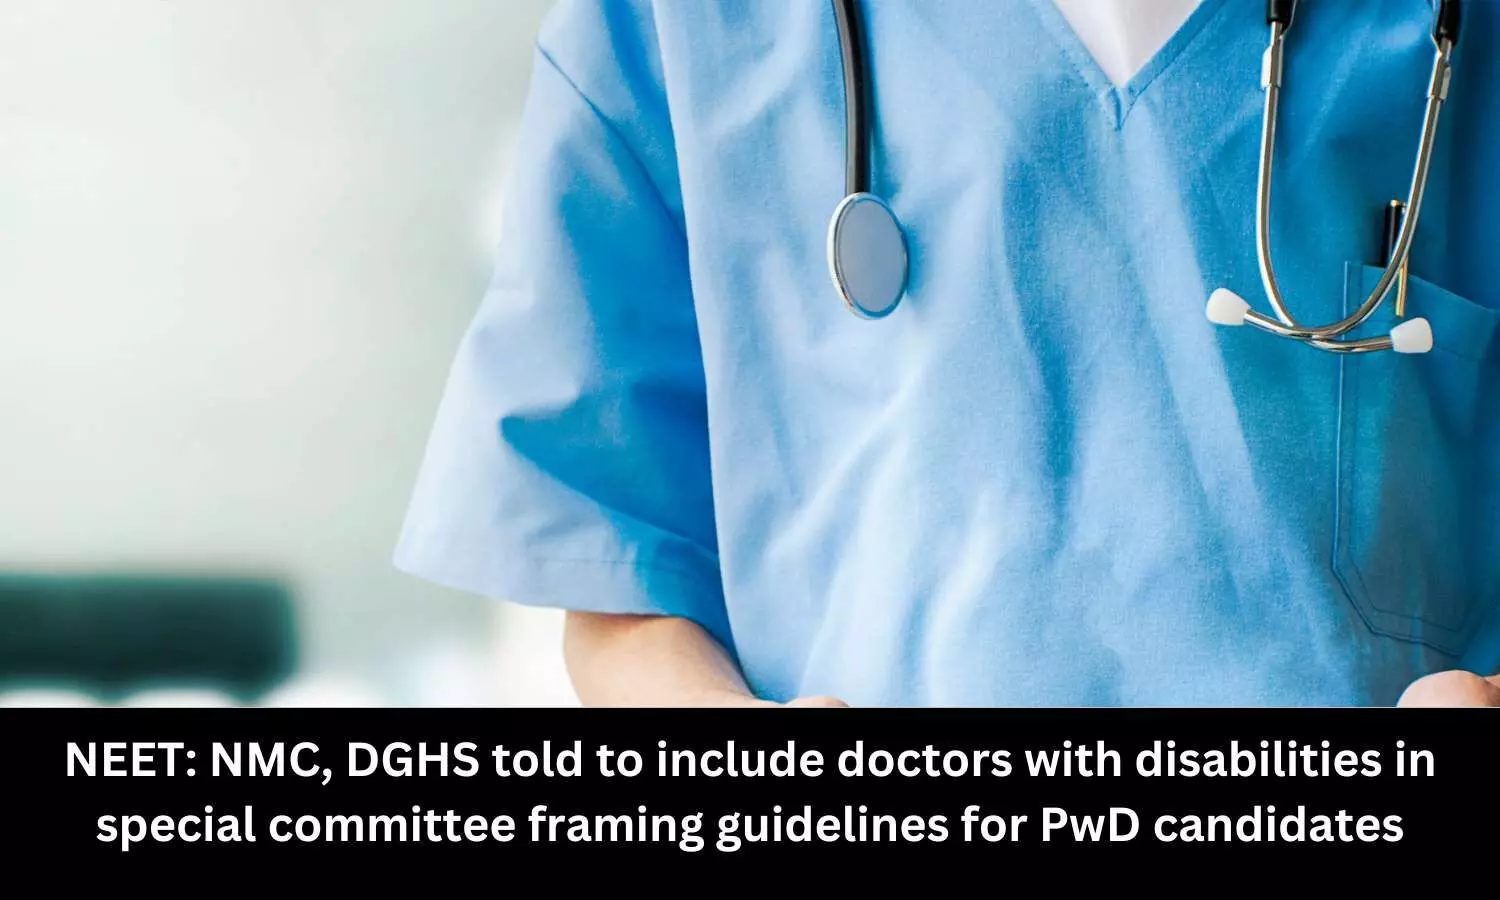 NEET: Court directs DGHS, NMC to include doctors with disabilities in Special Committee framing PwD guidelines